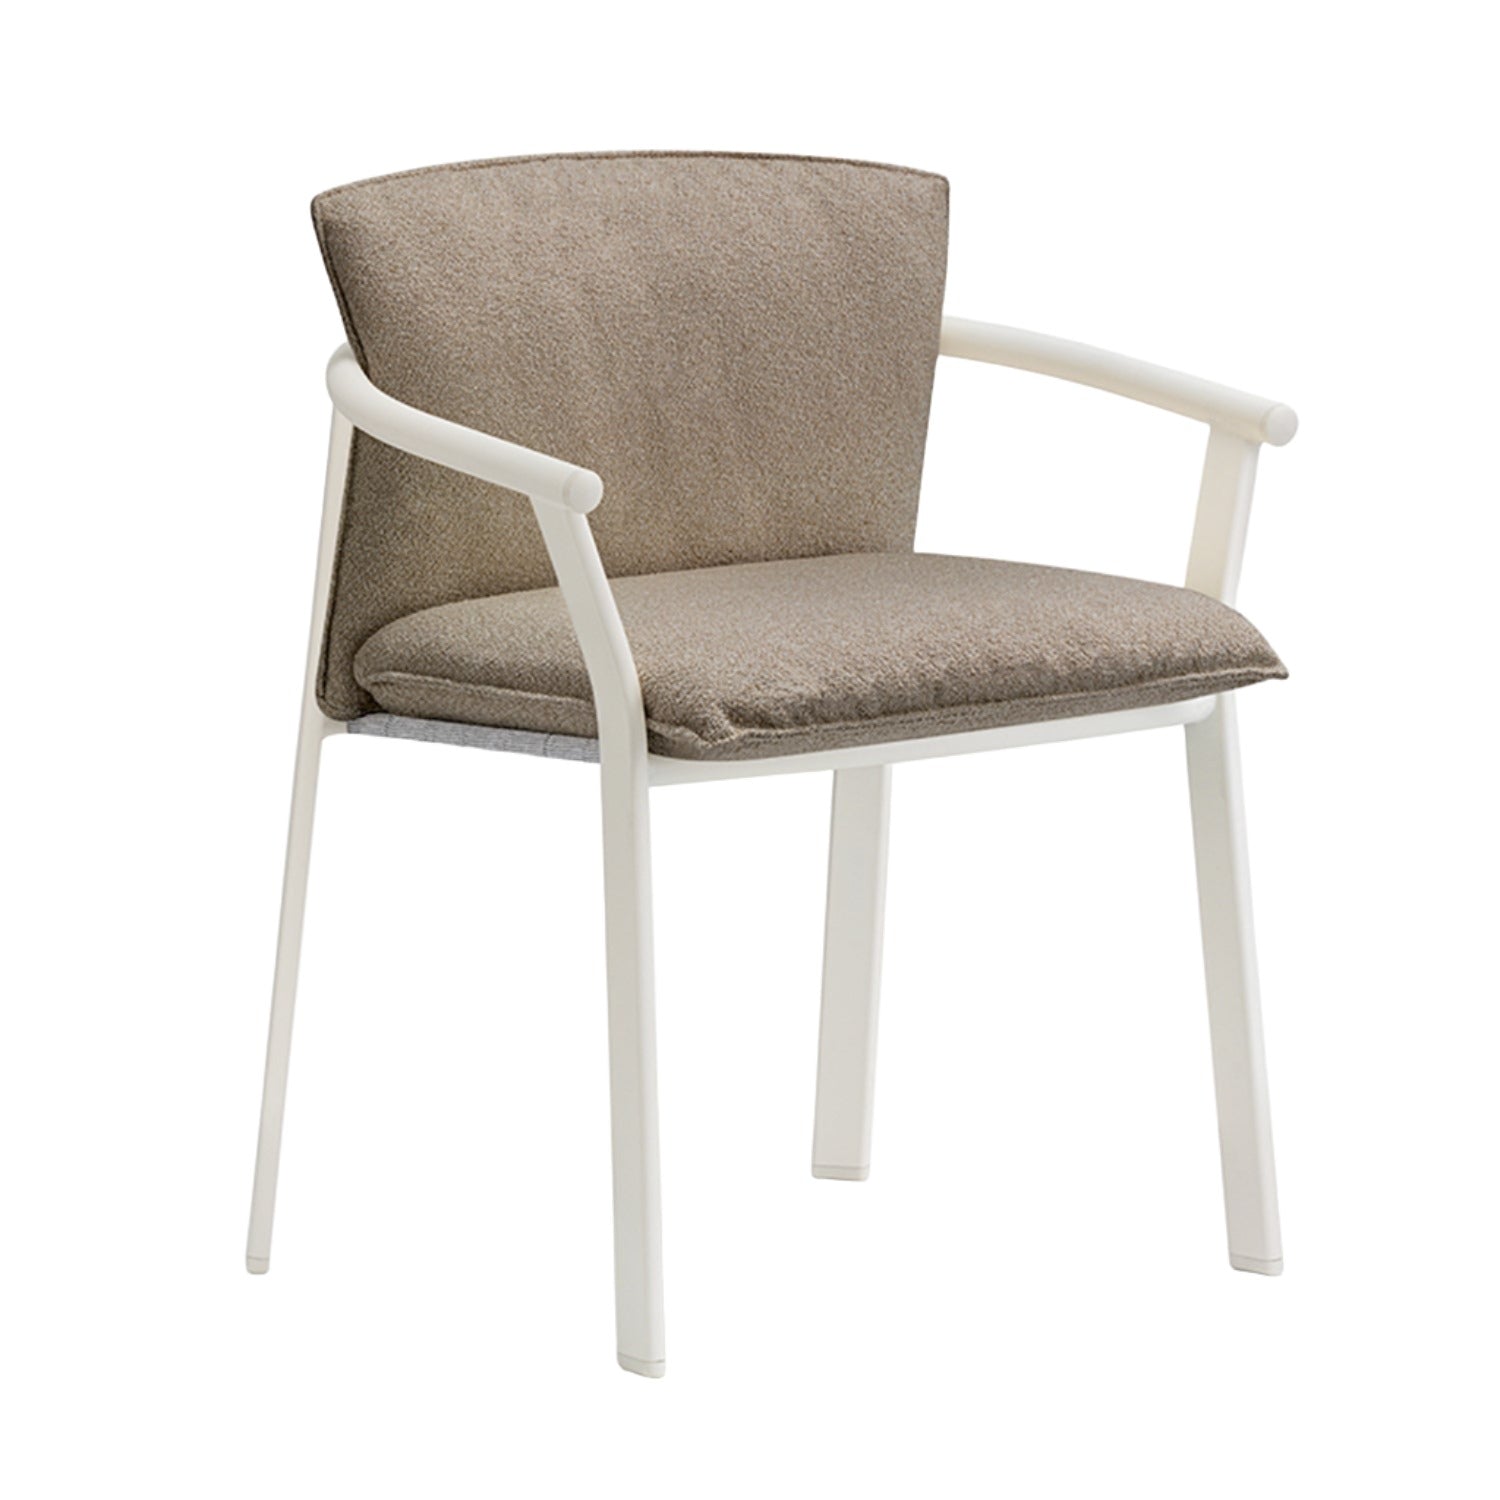 Pedrali Lamorisse 3684 Dining Chair in white